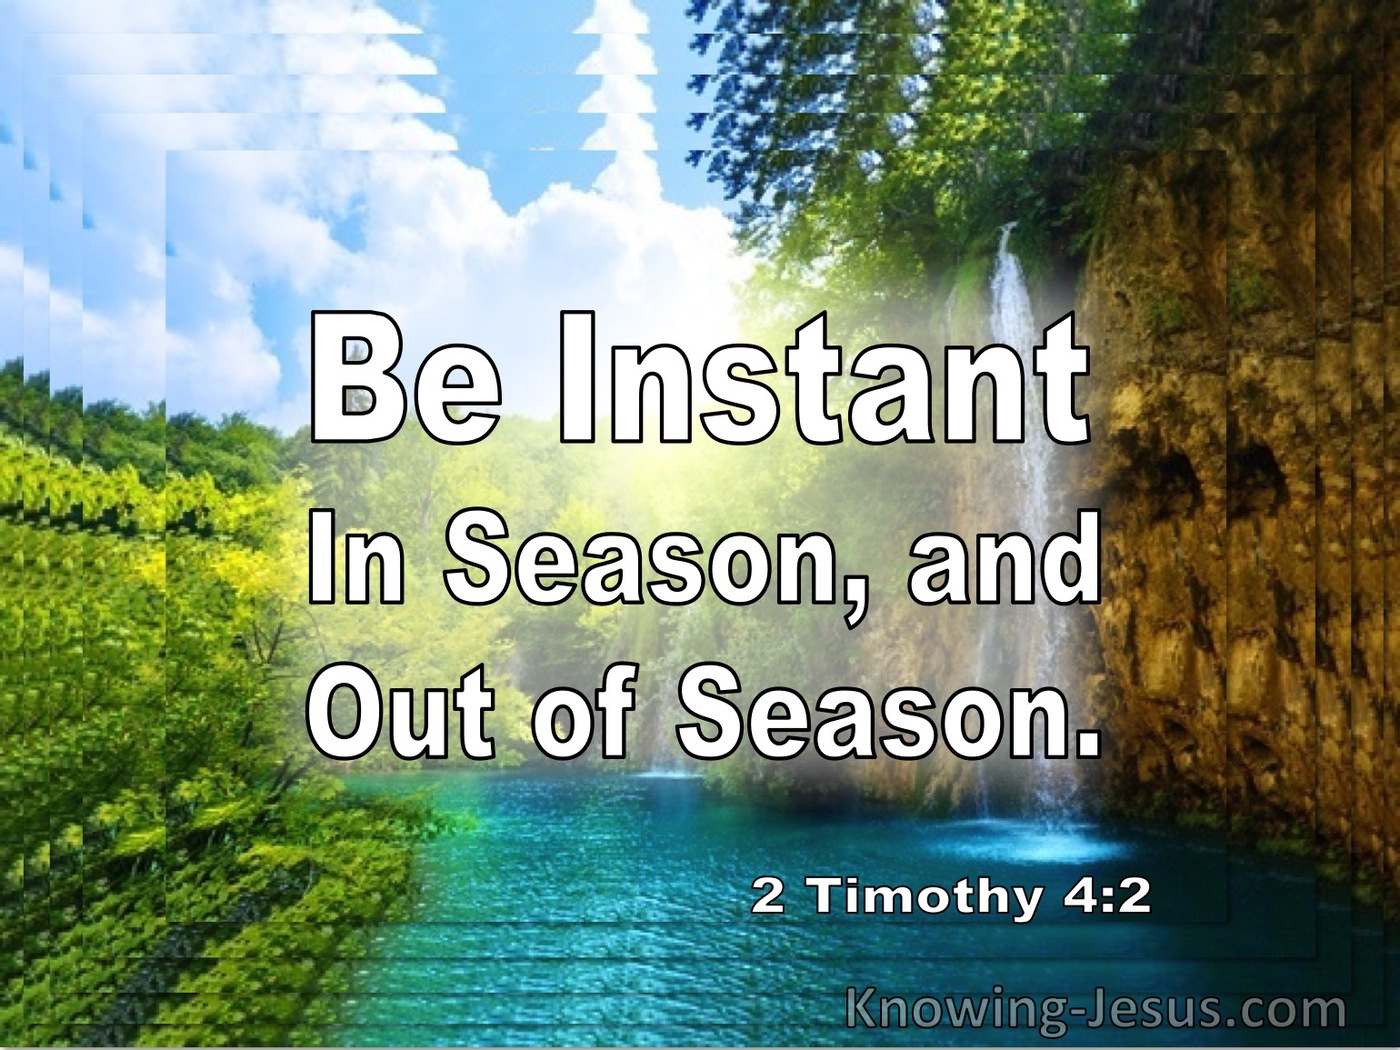 2 Timothy 4:2 Be Instant In And Out Of Season (utmost)04:25